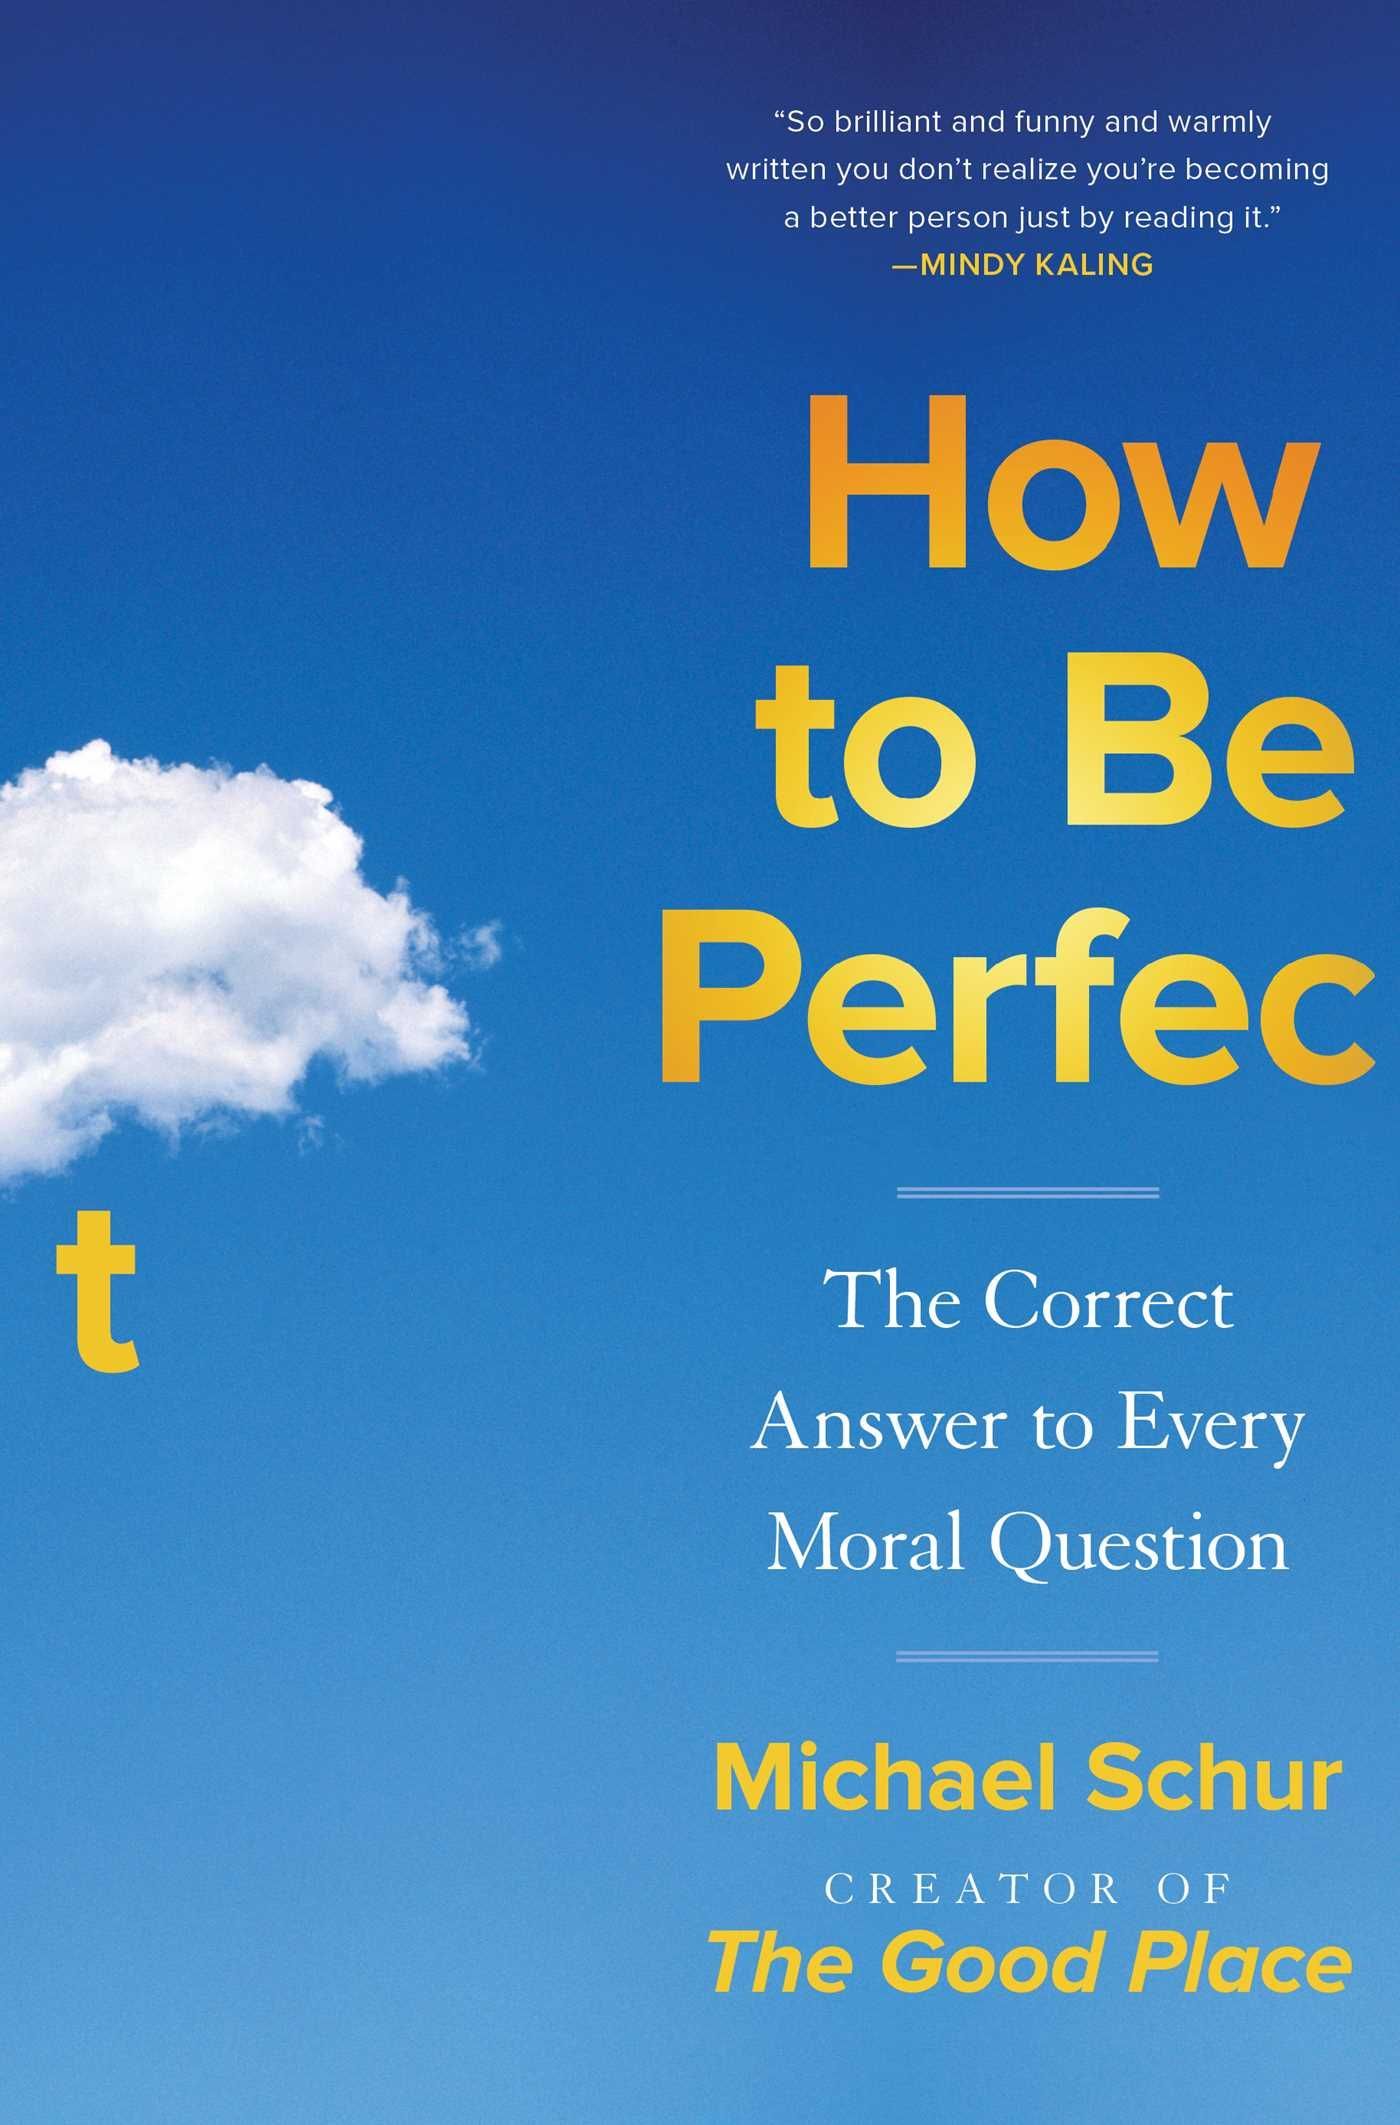 How to Be Perfect: The Correct Answer to Every Moral Question by Michael Schur